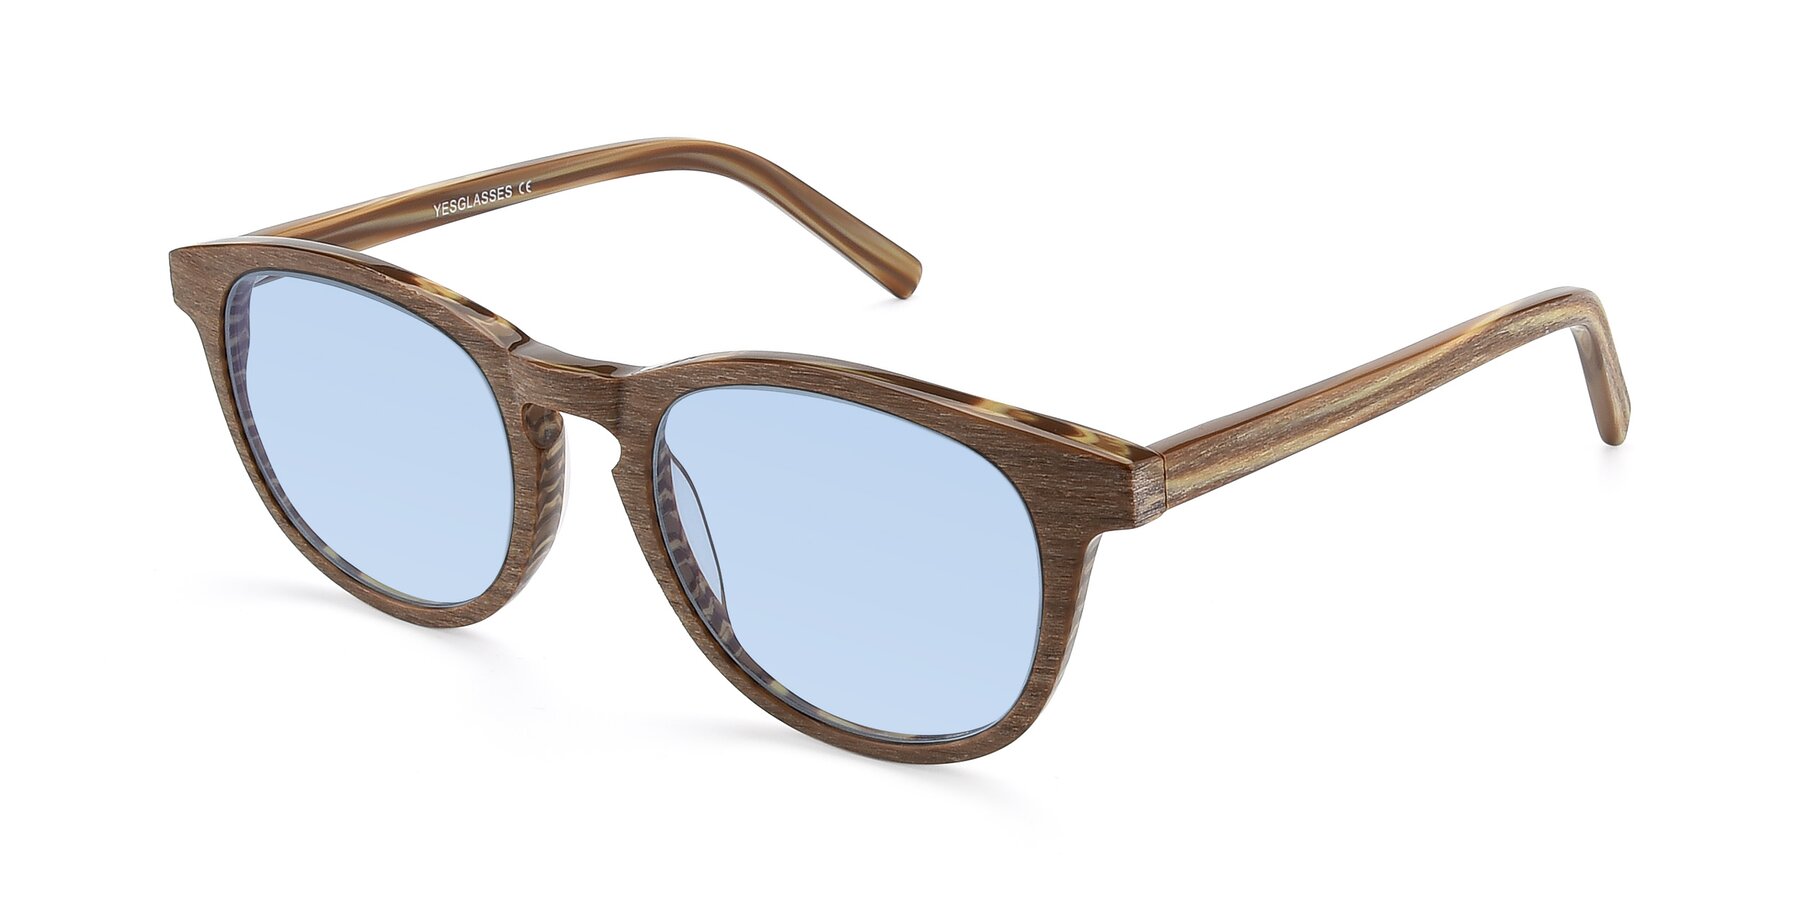 Angle of SR6044 in Brown-Wooden with Light Blue Tinted Lenses